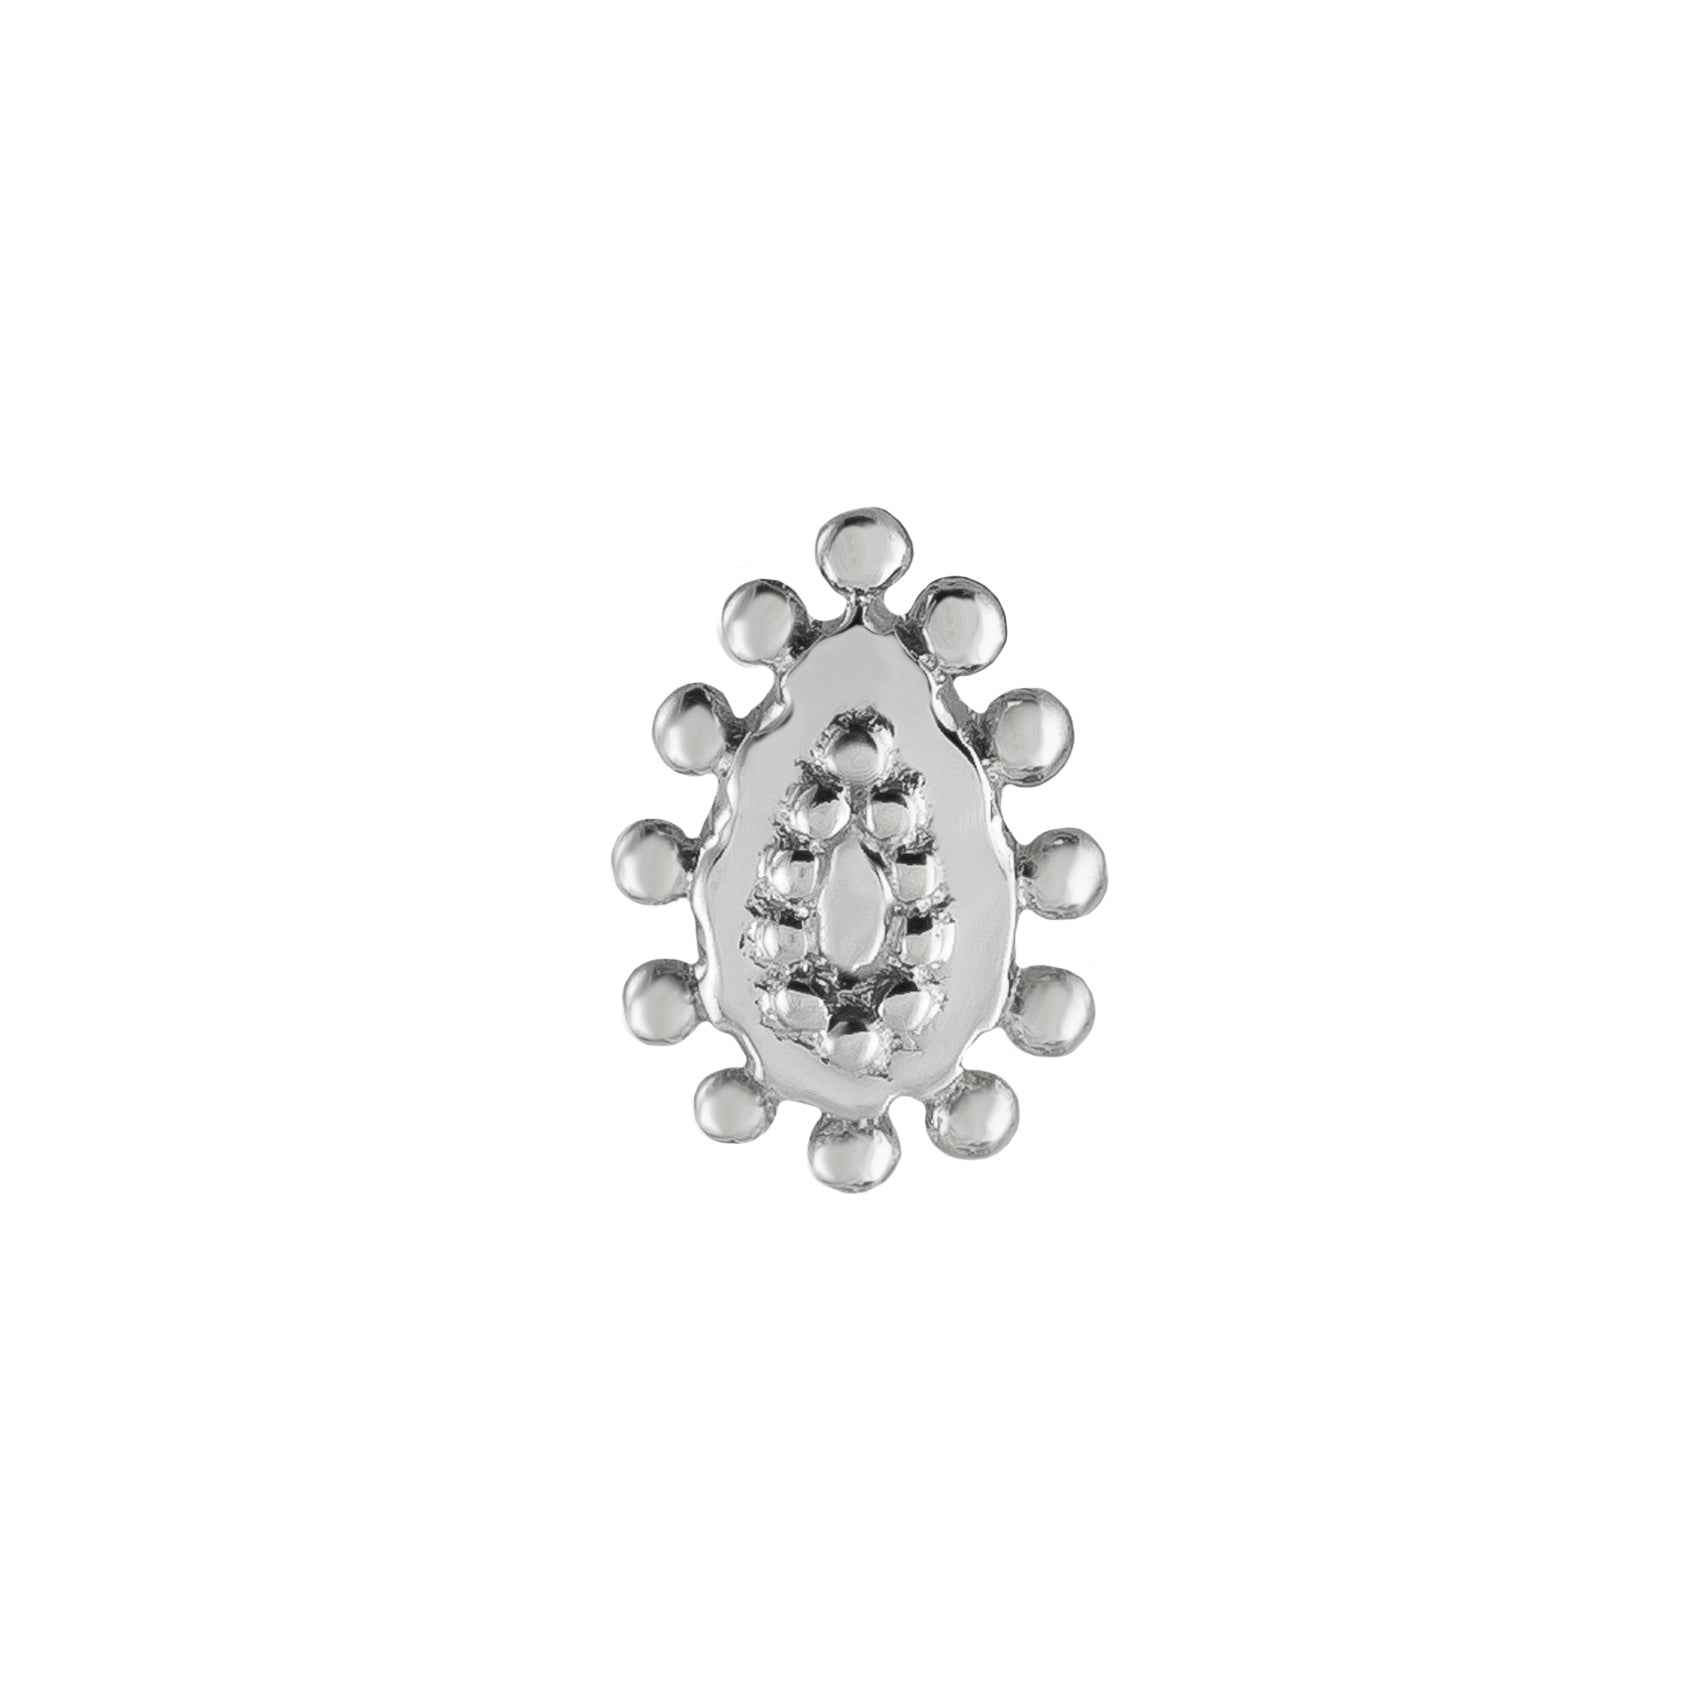 METIER BY TOMFOOLERY DALA DETAILS BOLD WHITE GOLD TEAR STUD